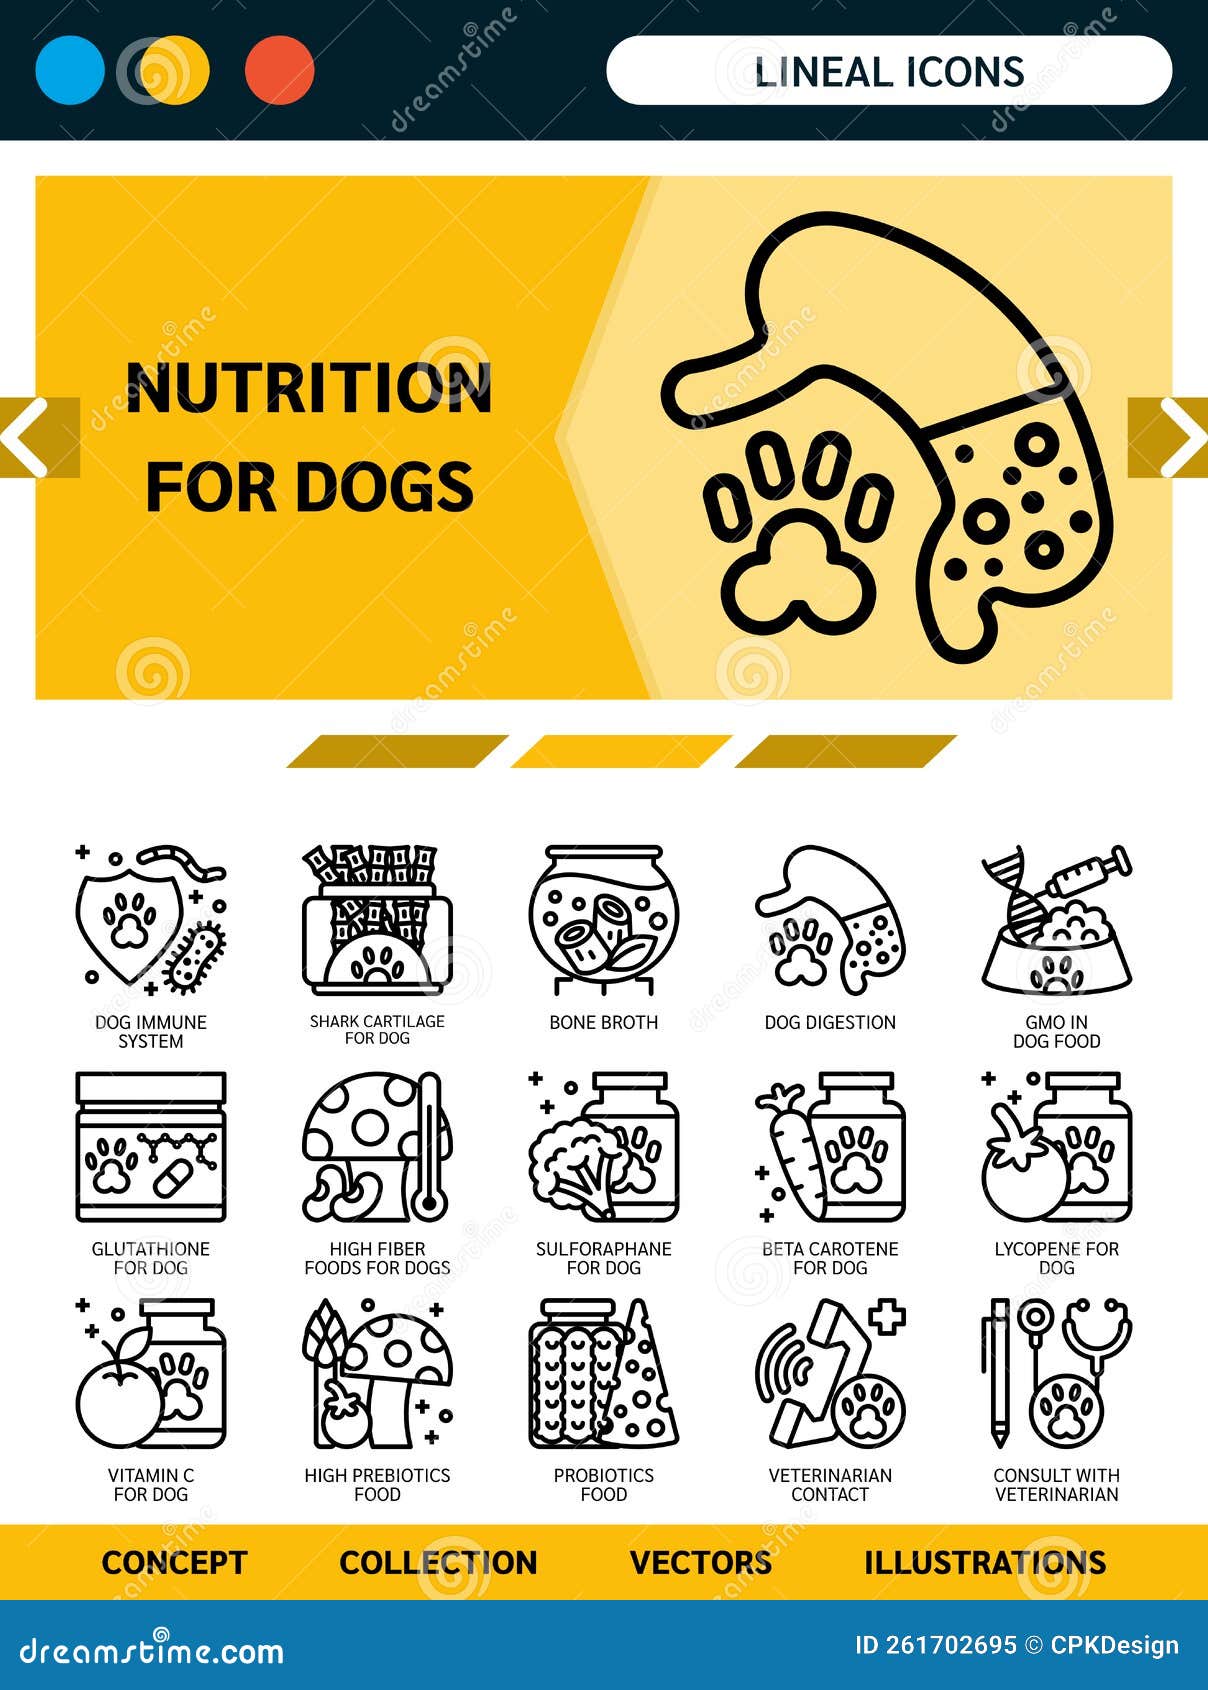 nutrition for dog lineal icons.